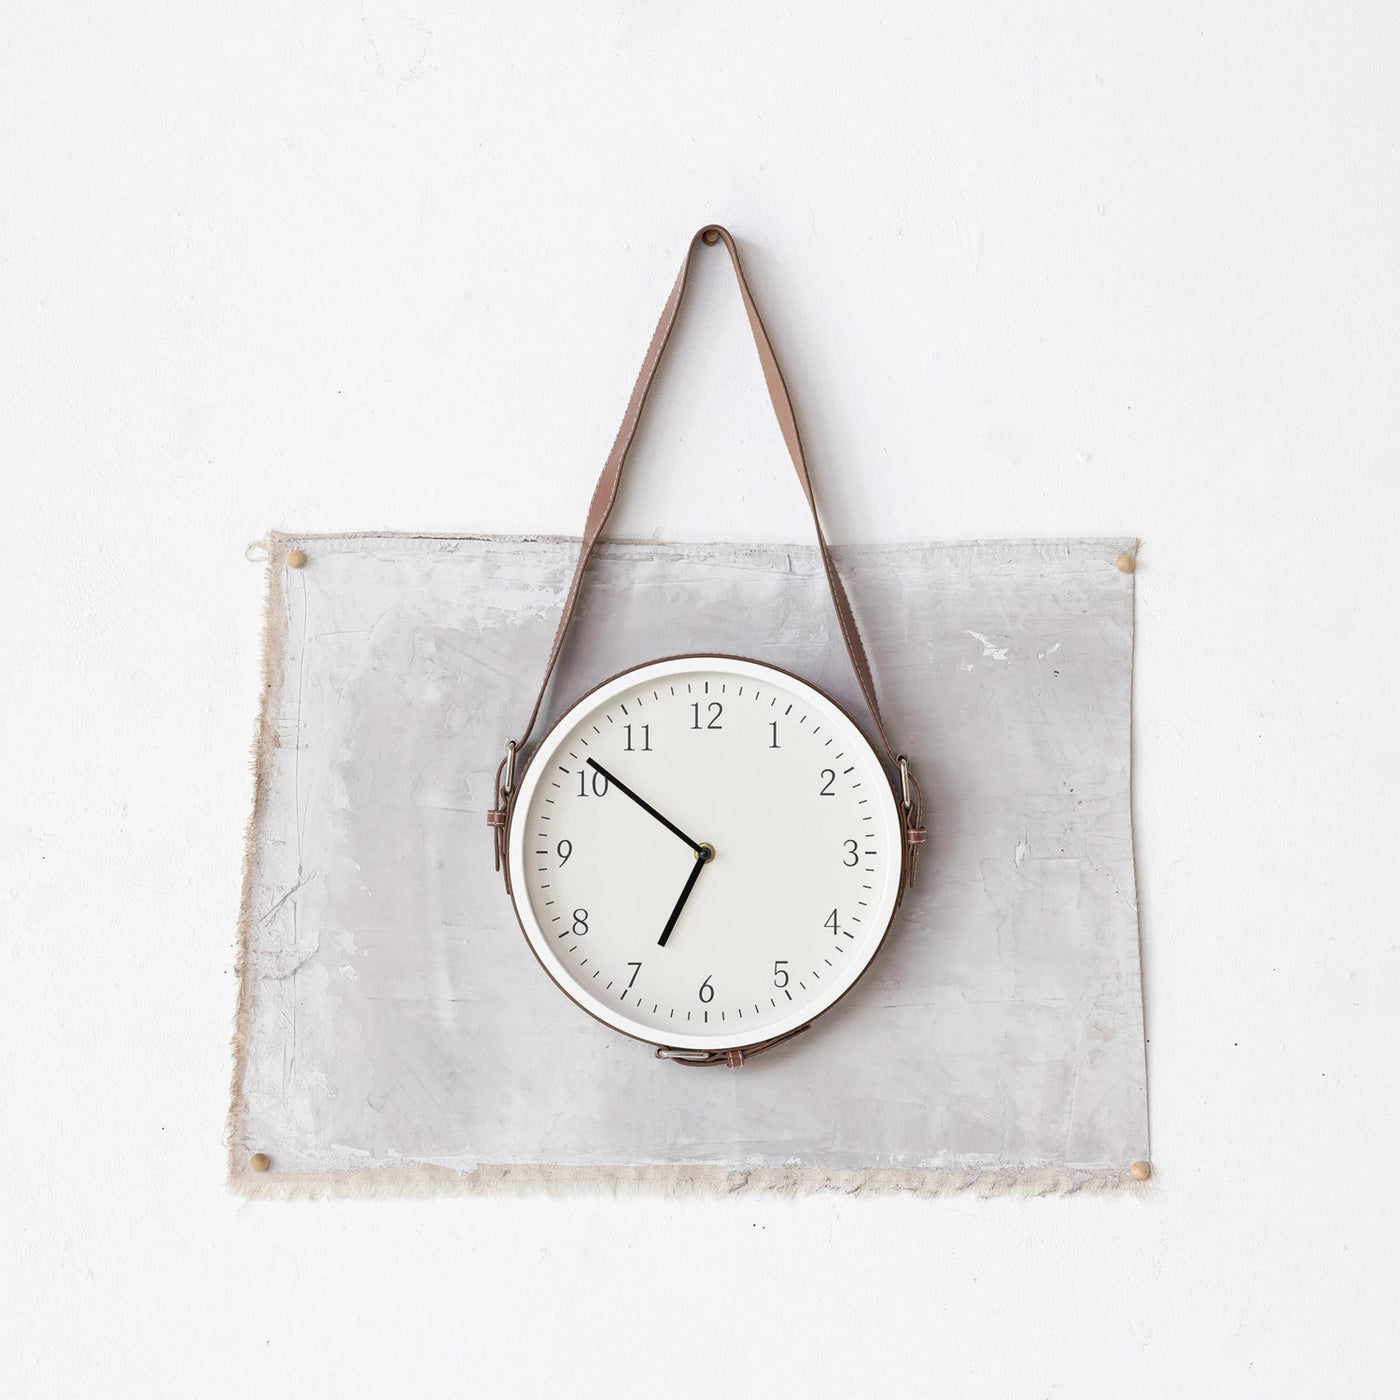 Hanging Clock with Leather Strap